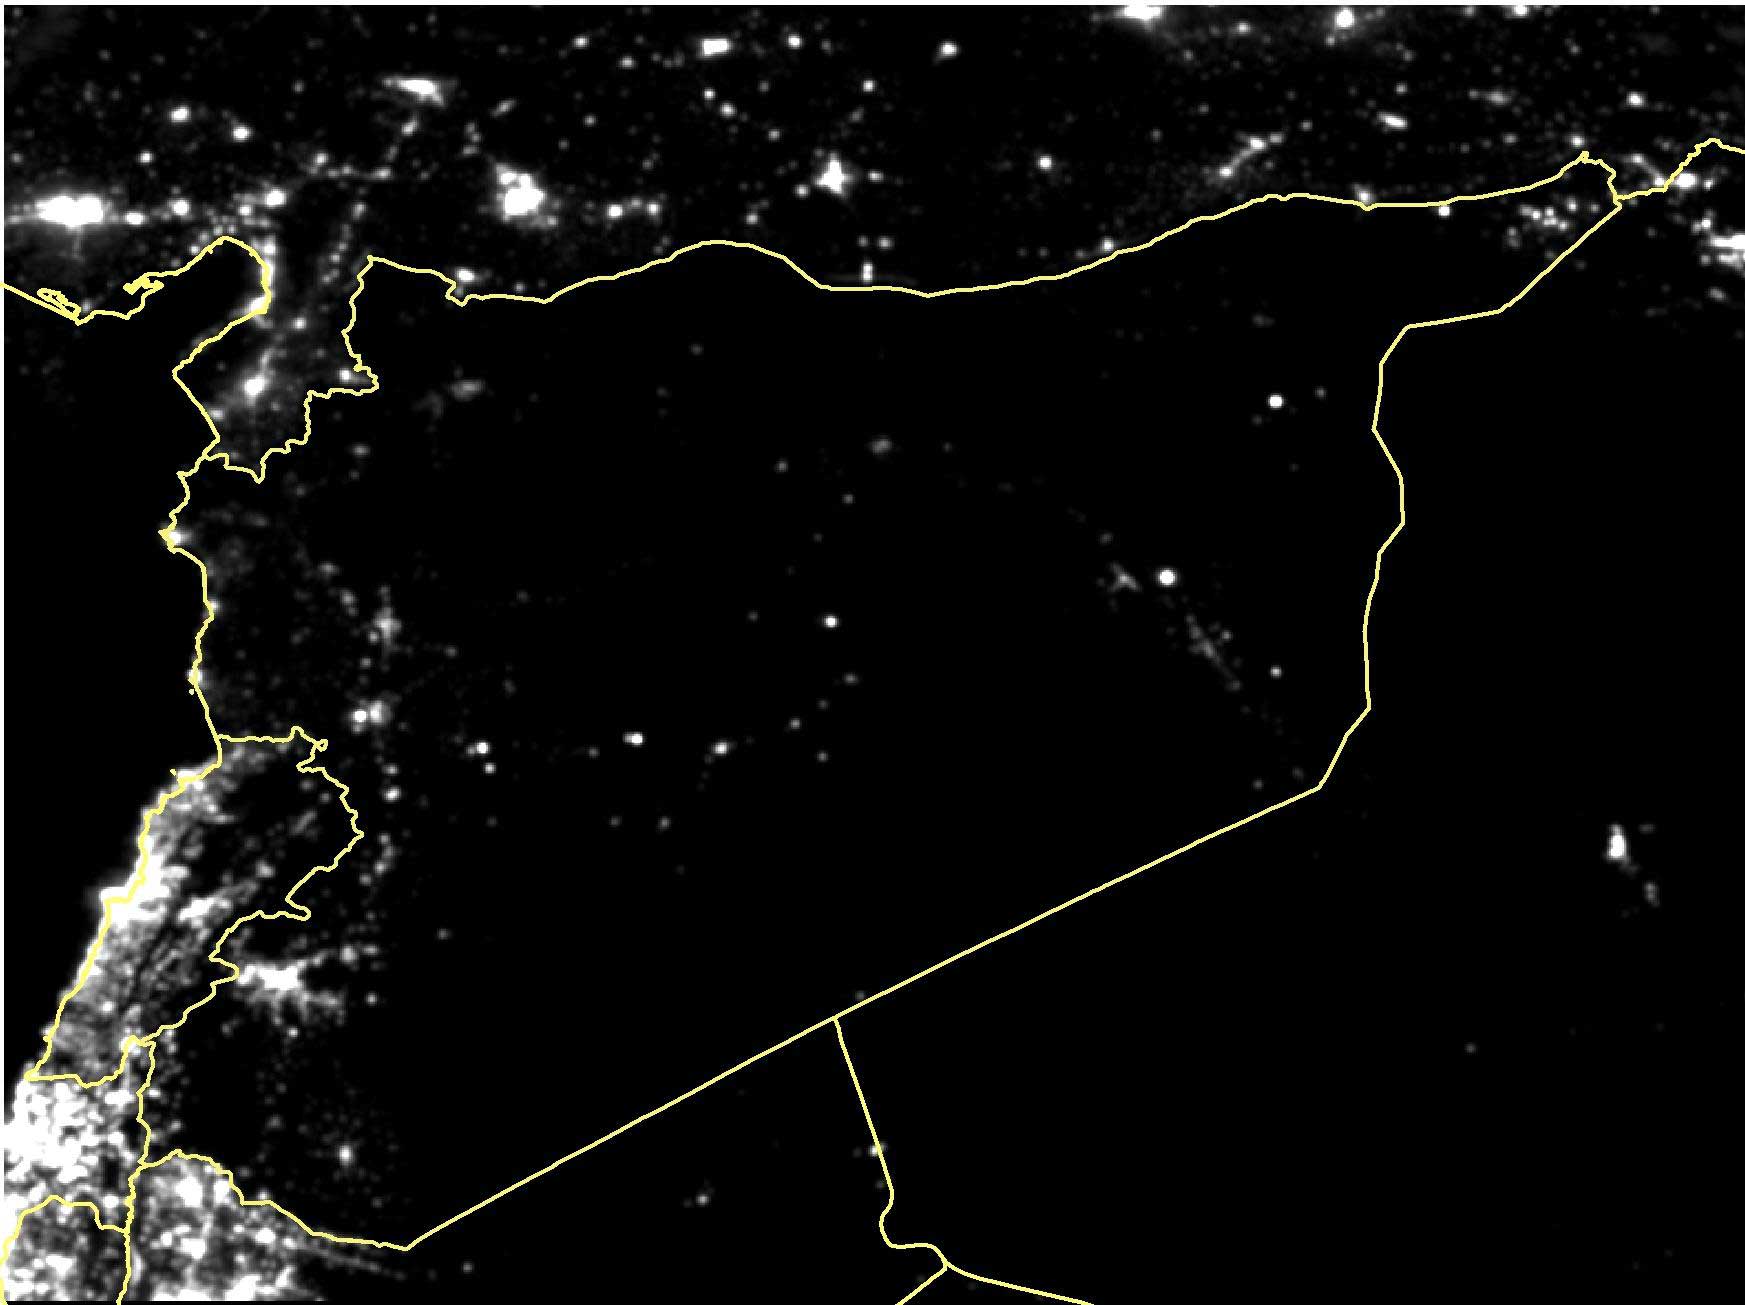 Satellite imagery of Syria in February 2015.